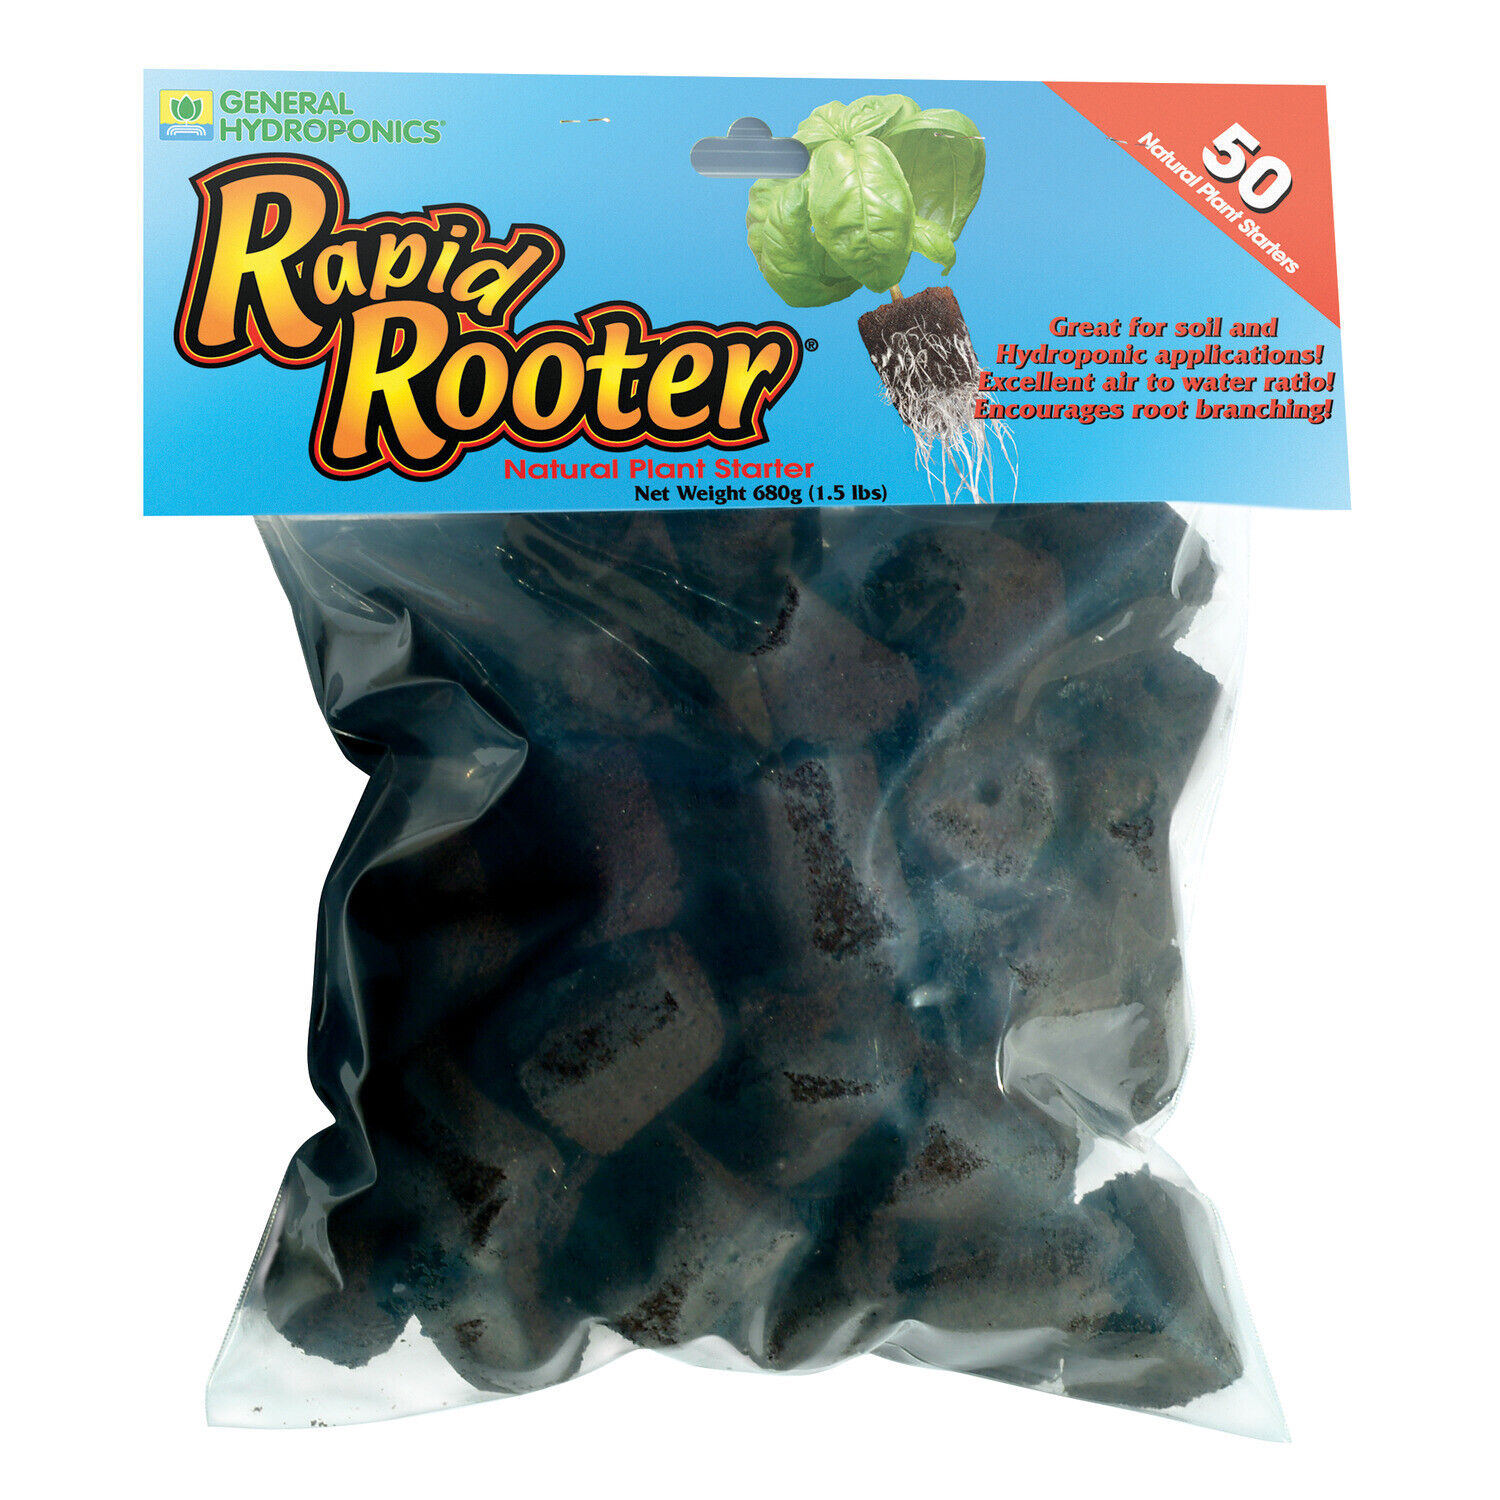 General Hydroponics Rapid Rooter, Starter Plug for Seeds or Cuttings